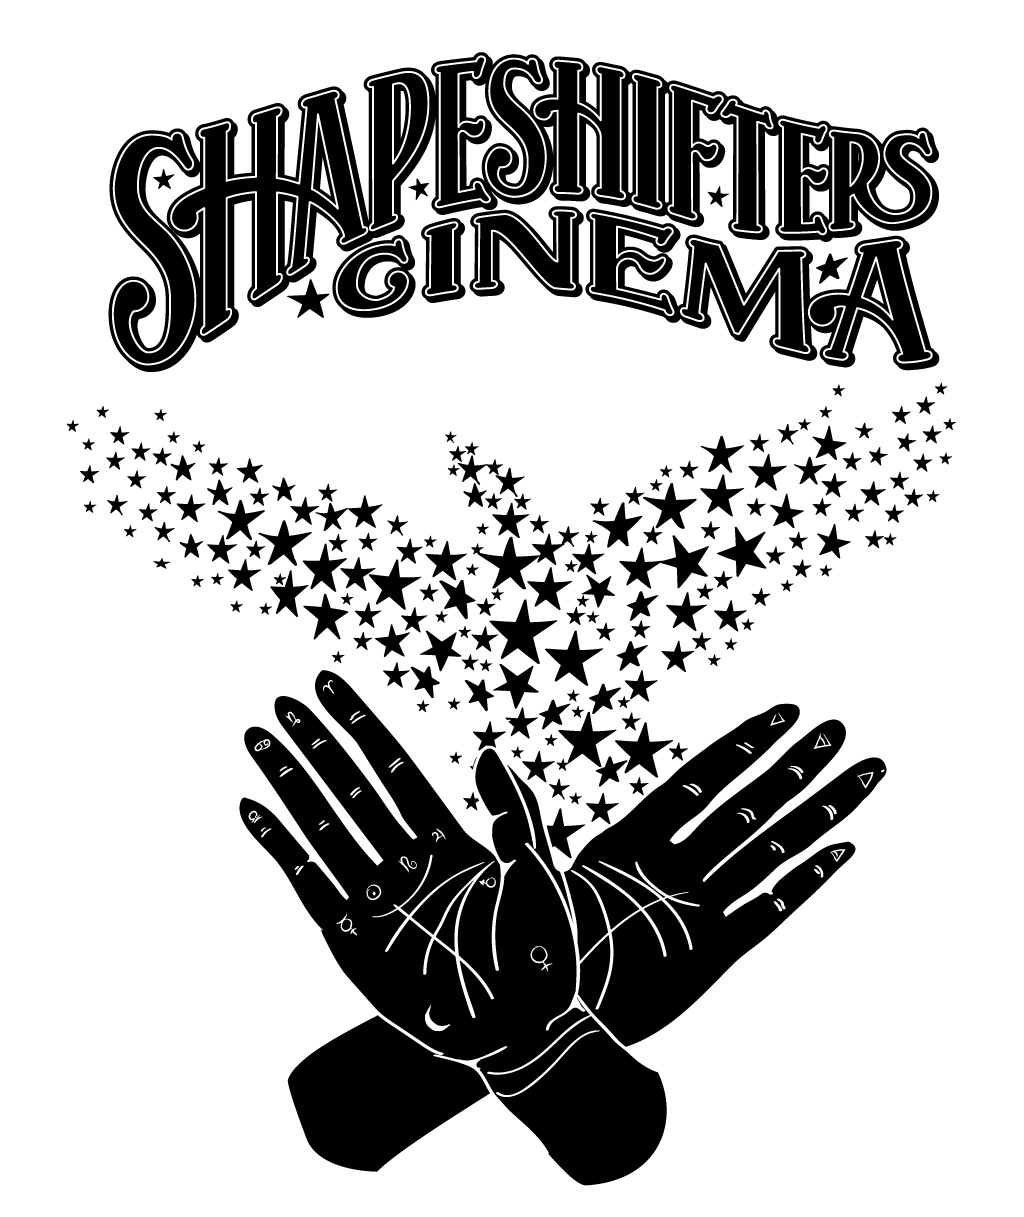 Shapeshifters Cinema and Brewery